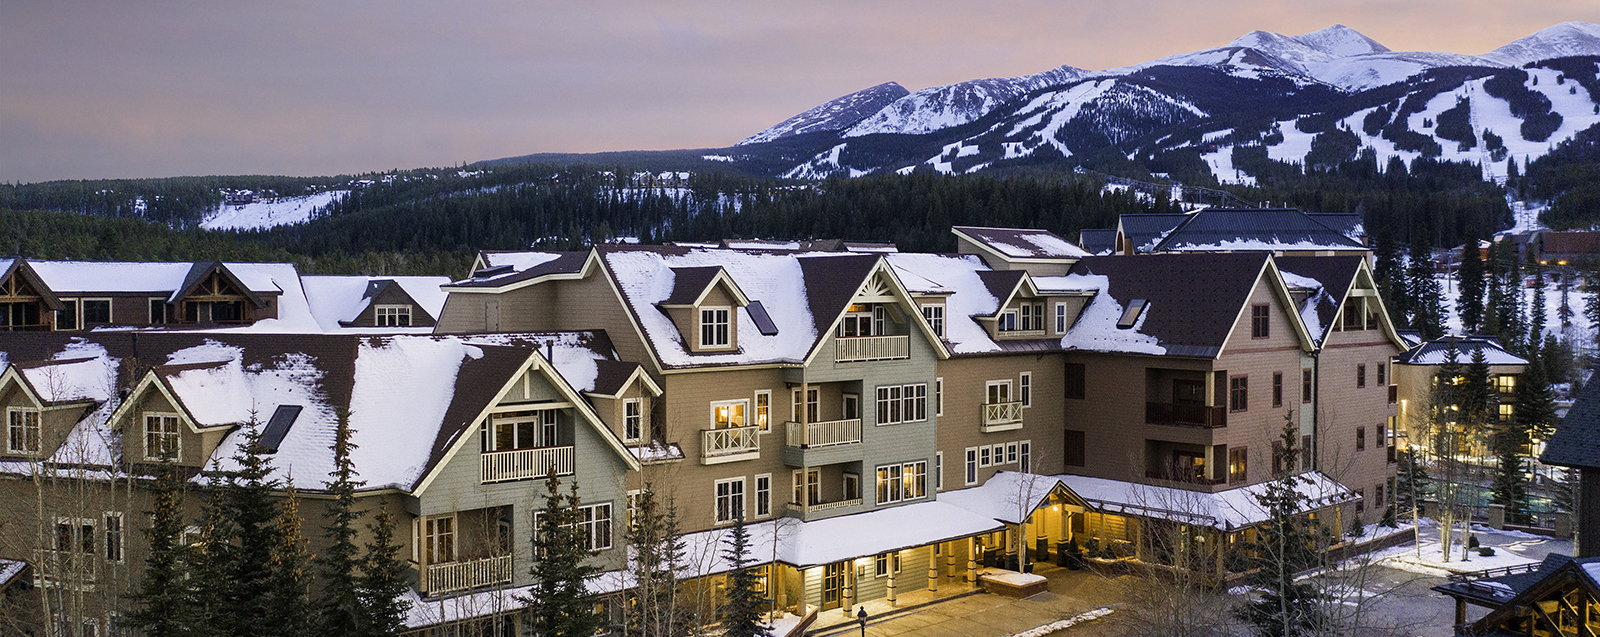 Photo of HVC The Residences at Main Street Station, Breckenridge, CO